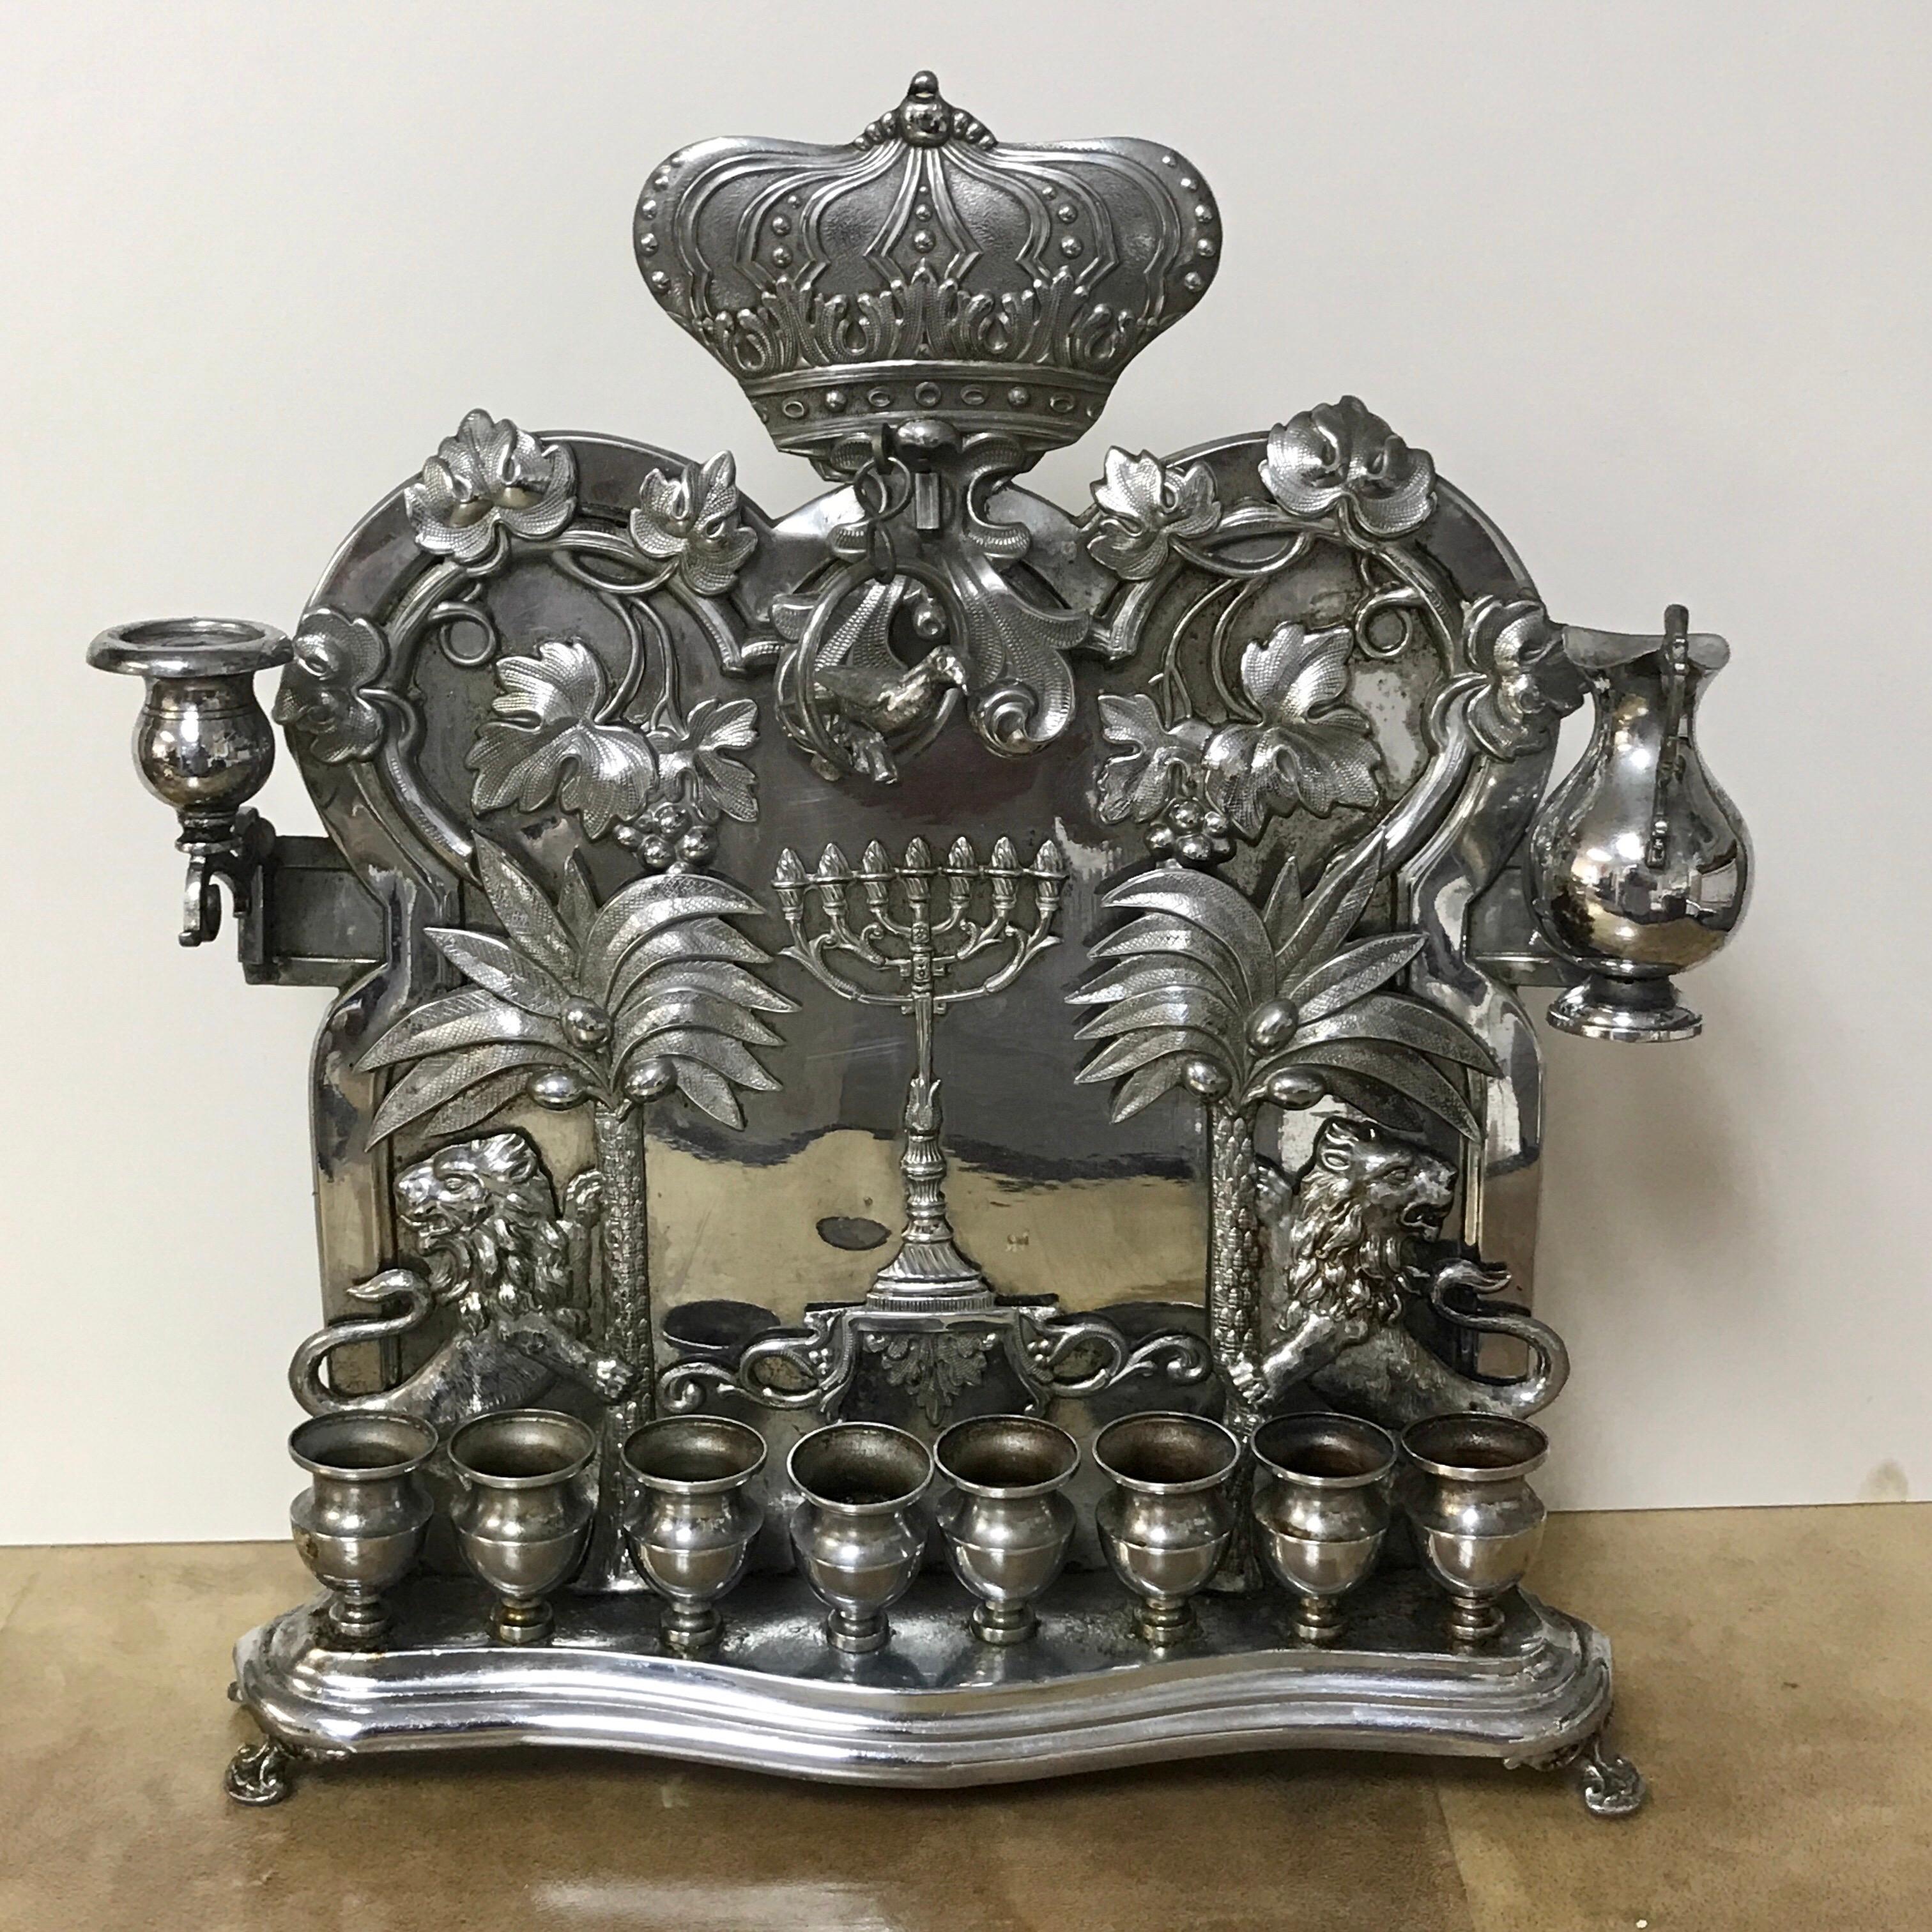 Antique silver plated Hannukah lamp, complete
Hallmarked for B. Henneberg Warszawa, circa 1898
Of typical form with upper swing arm candlestick, a resting dove and removable oil jug
Decorated with centre crown, palm trees, lions, central menorah